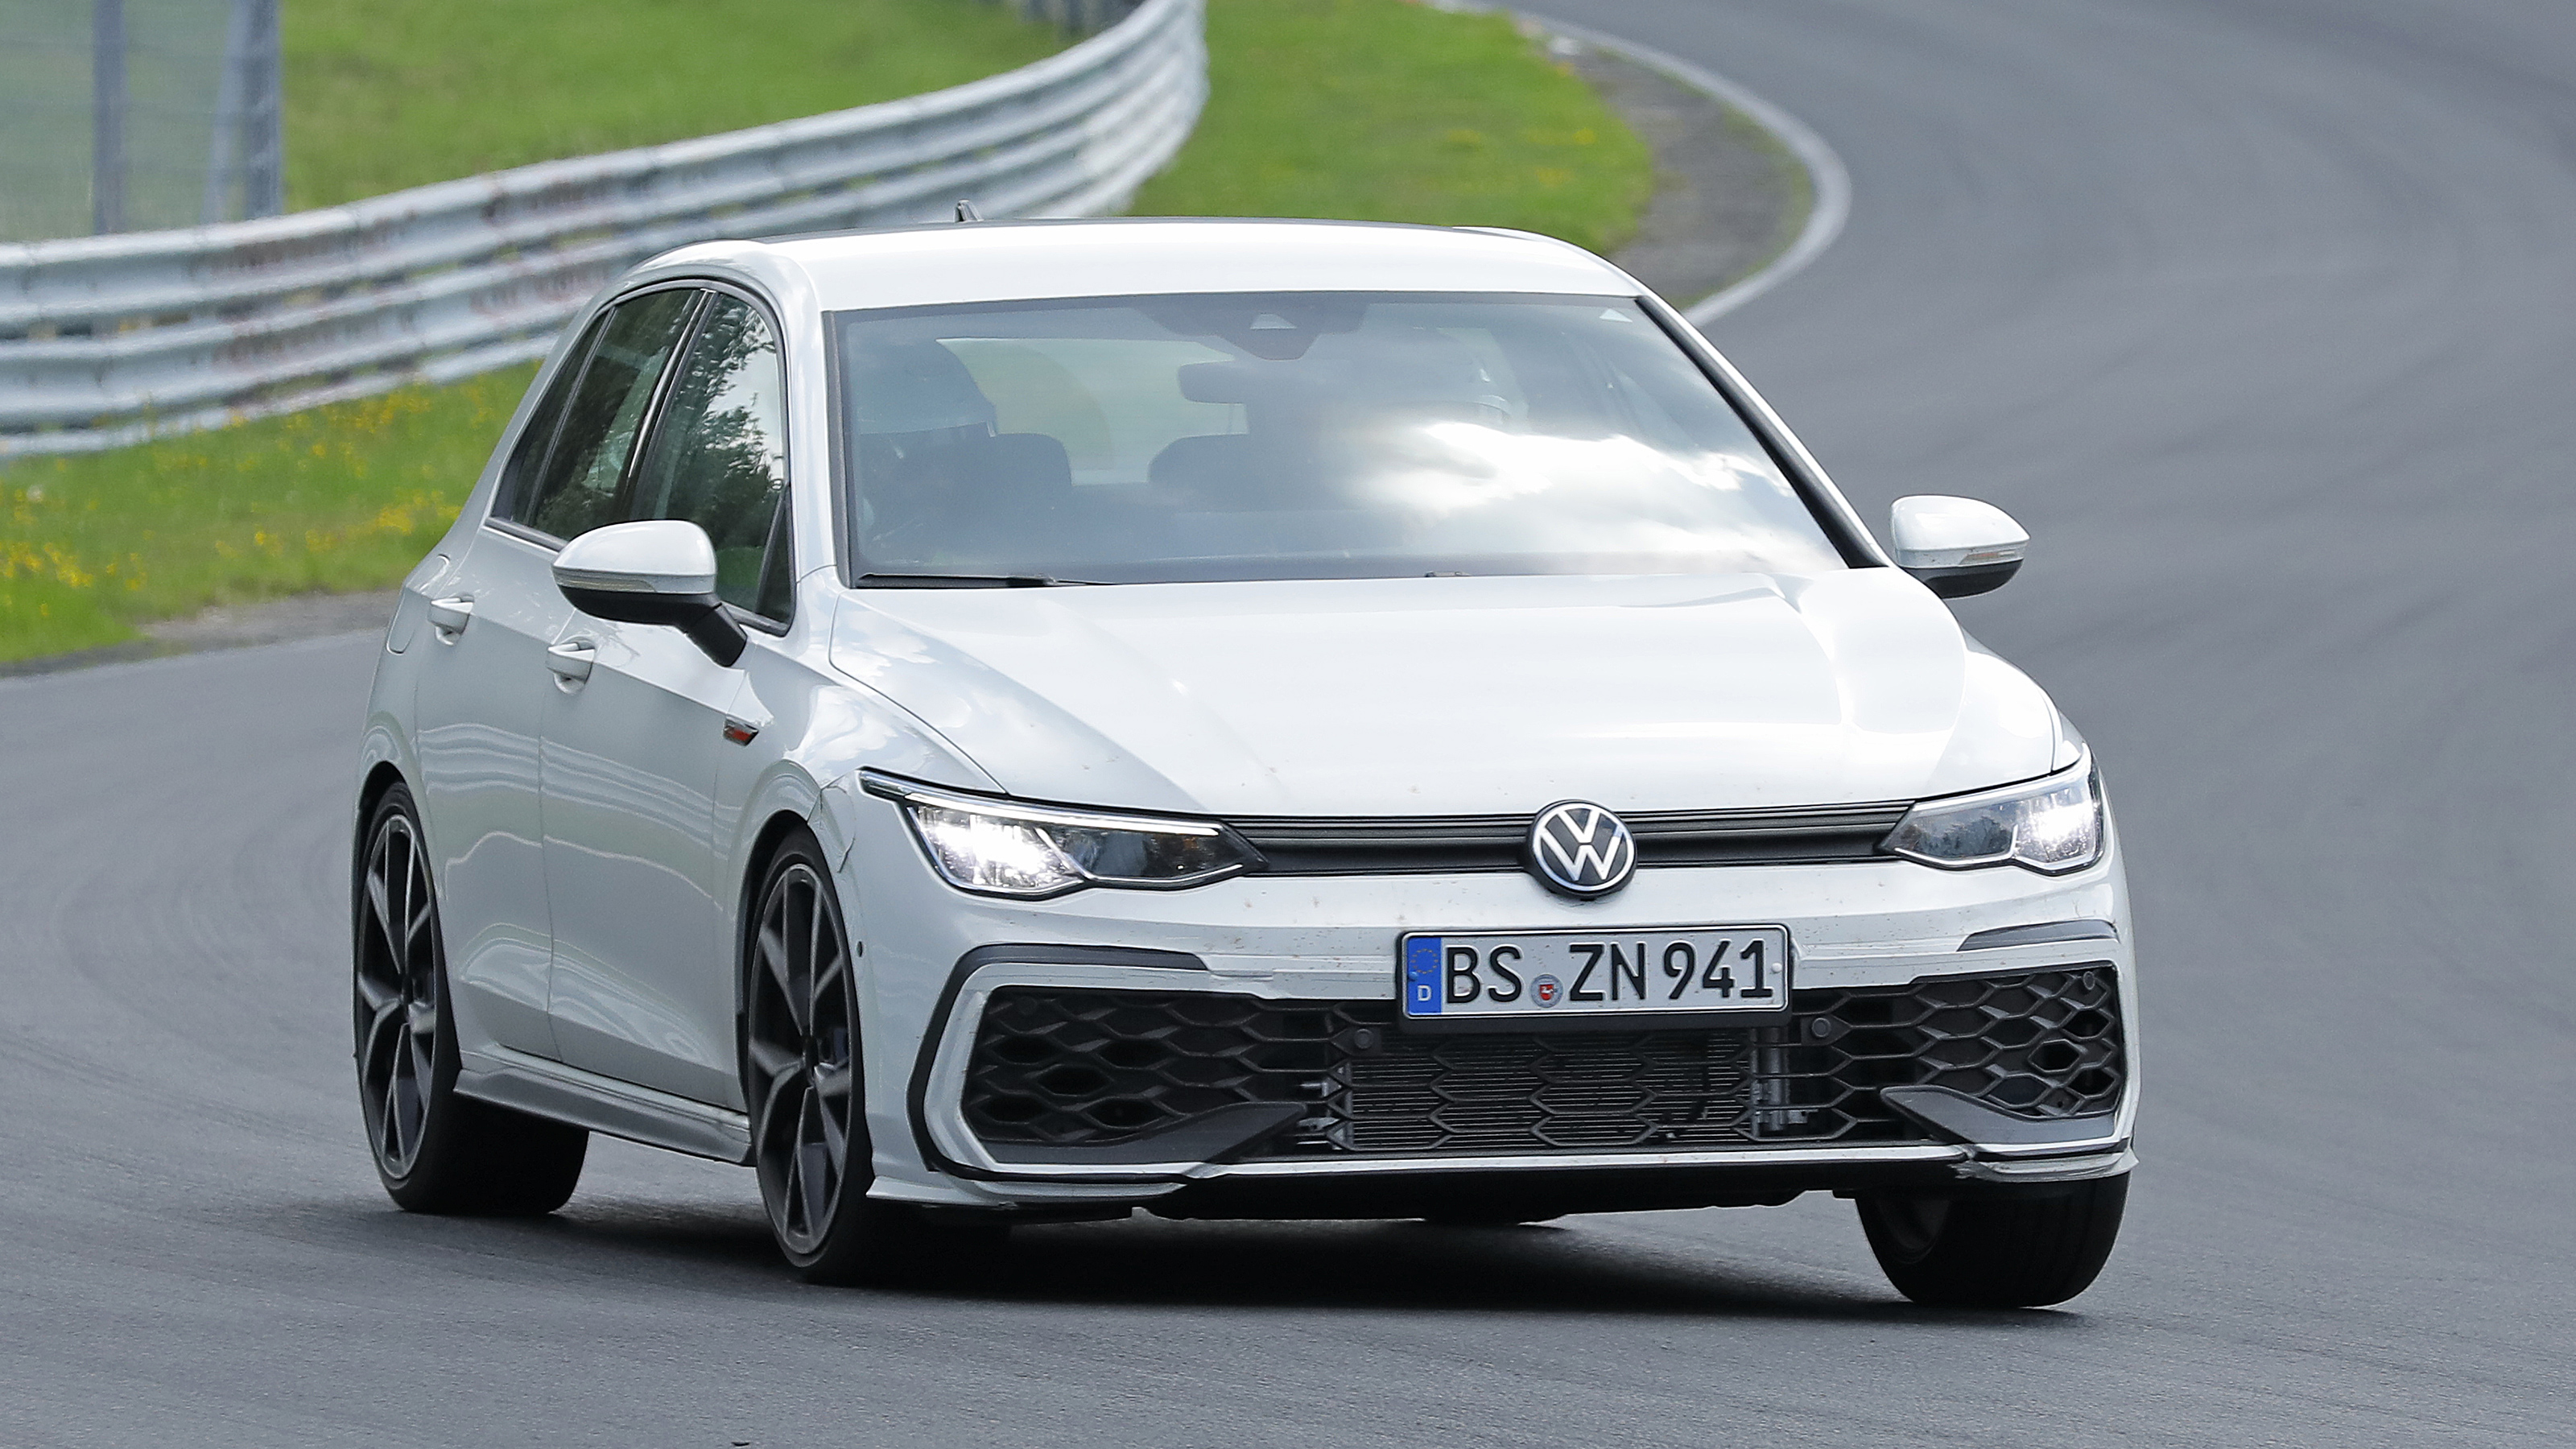 A new Volkswagen Golf GTI is on the way to address the Mk8's key